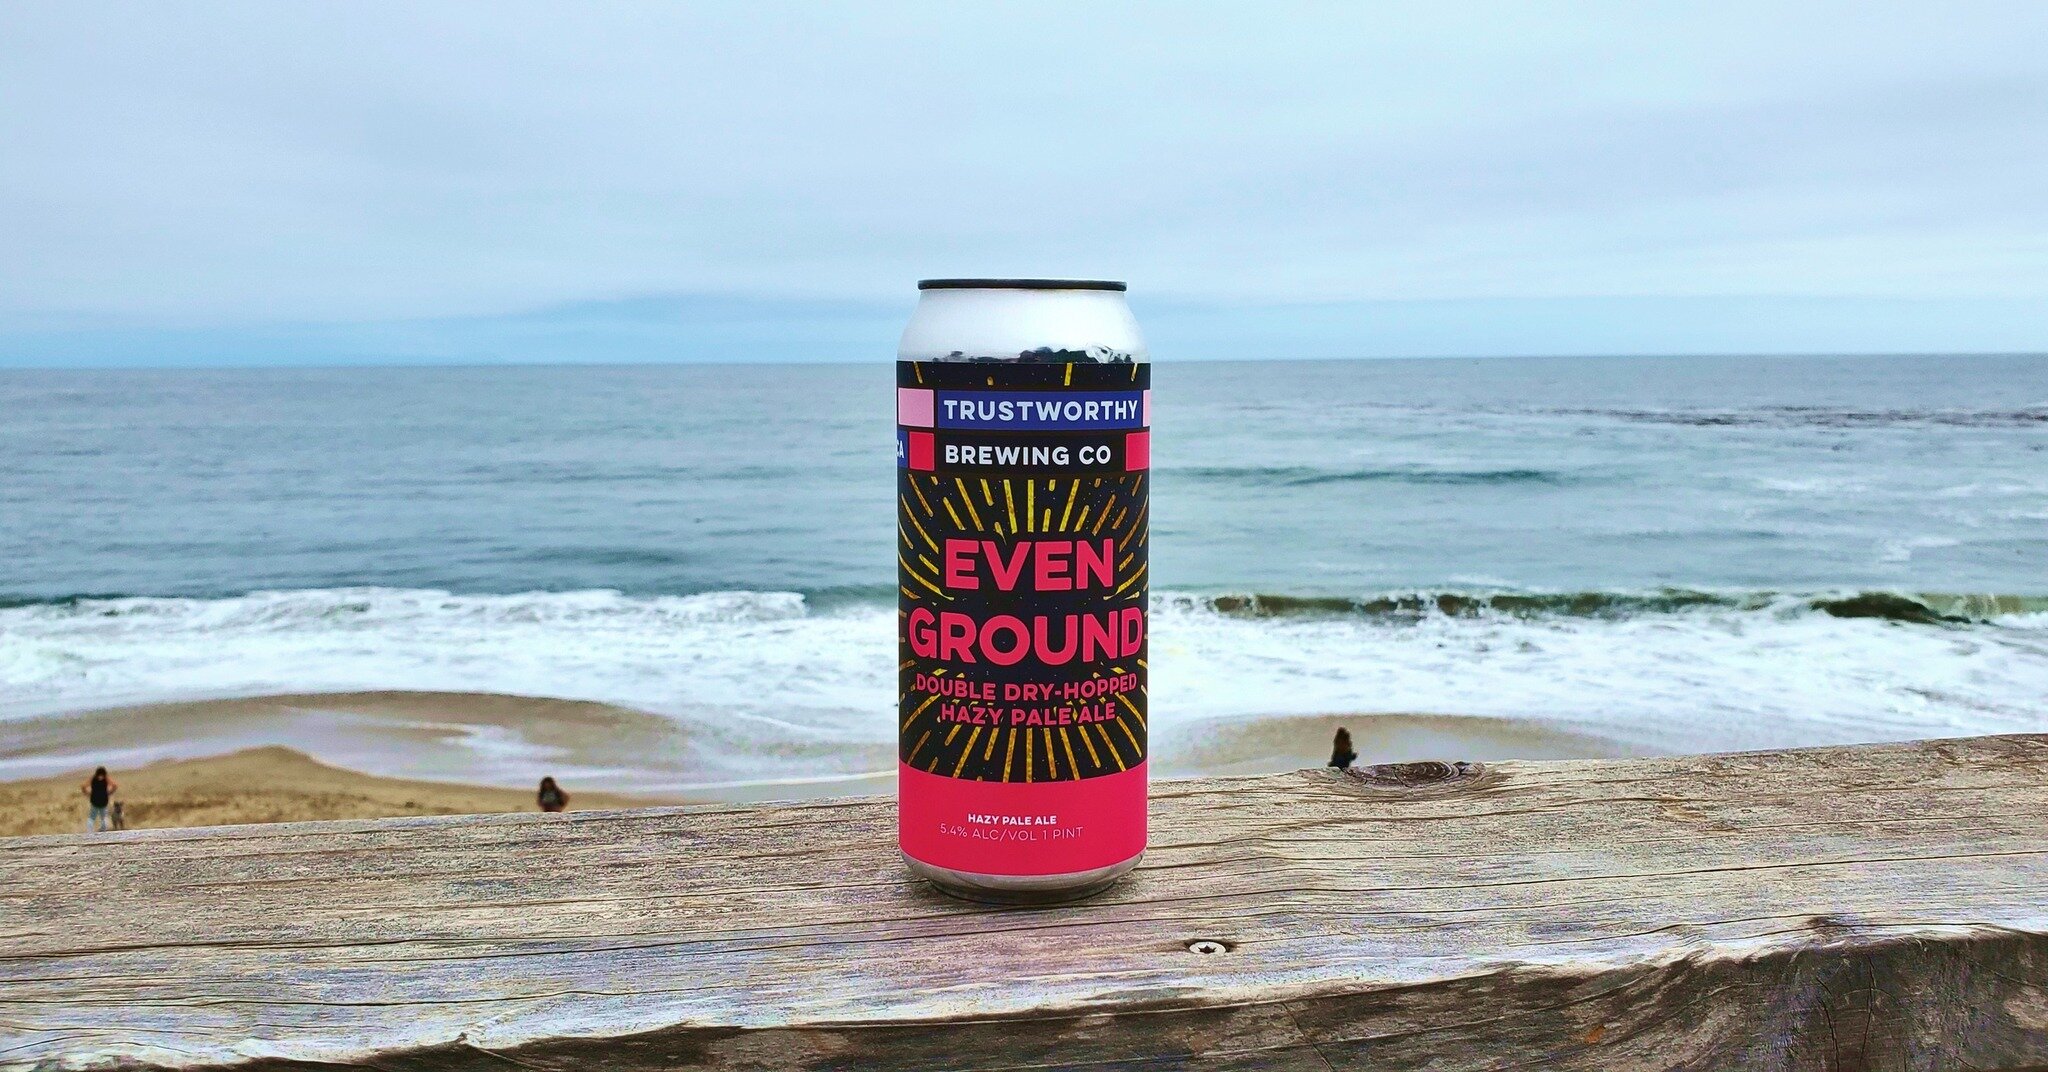 Happy International Women's Day from all of us at Trustworthy Brewing! To celebrate this special day we're running a special discount on our Pink Boots Society collab Even Ground Hazy Pale Ale! All 4-packs are $12 this Friday and Saturday!

For those